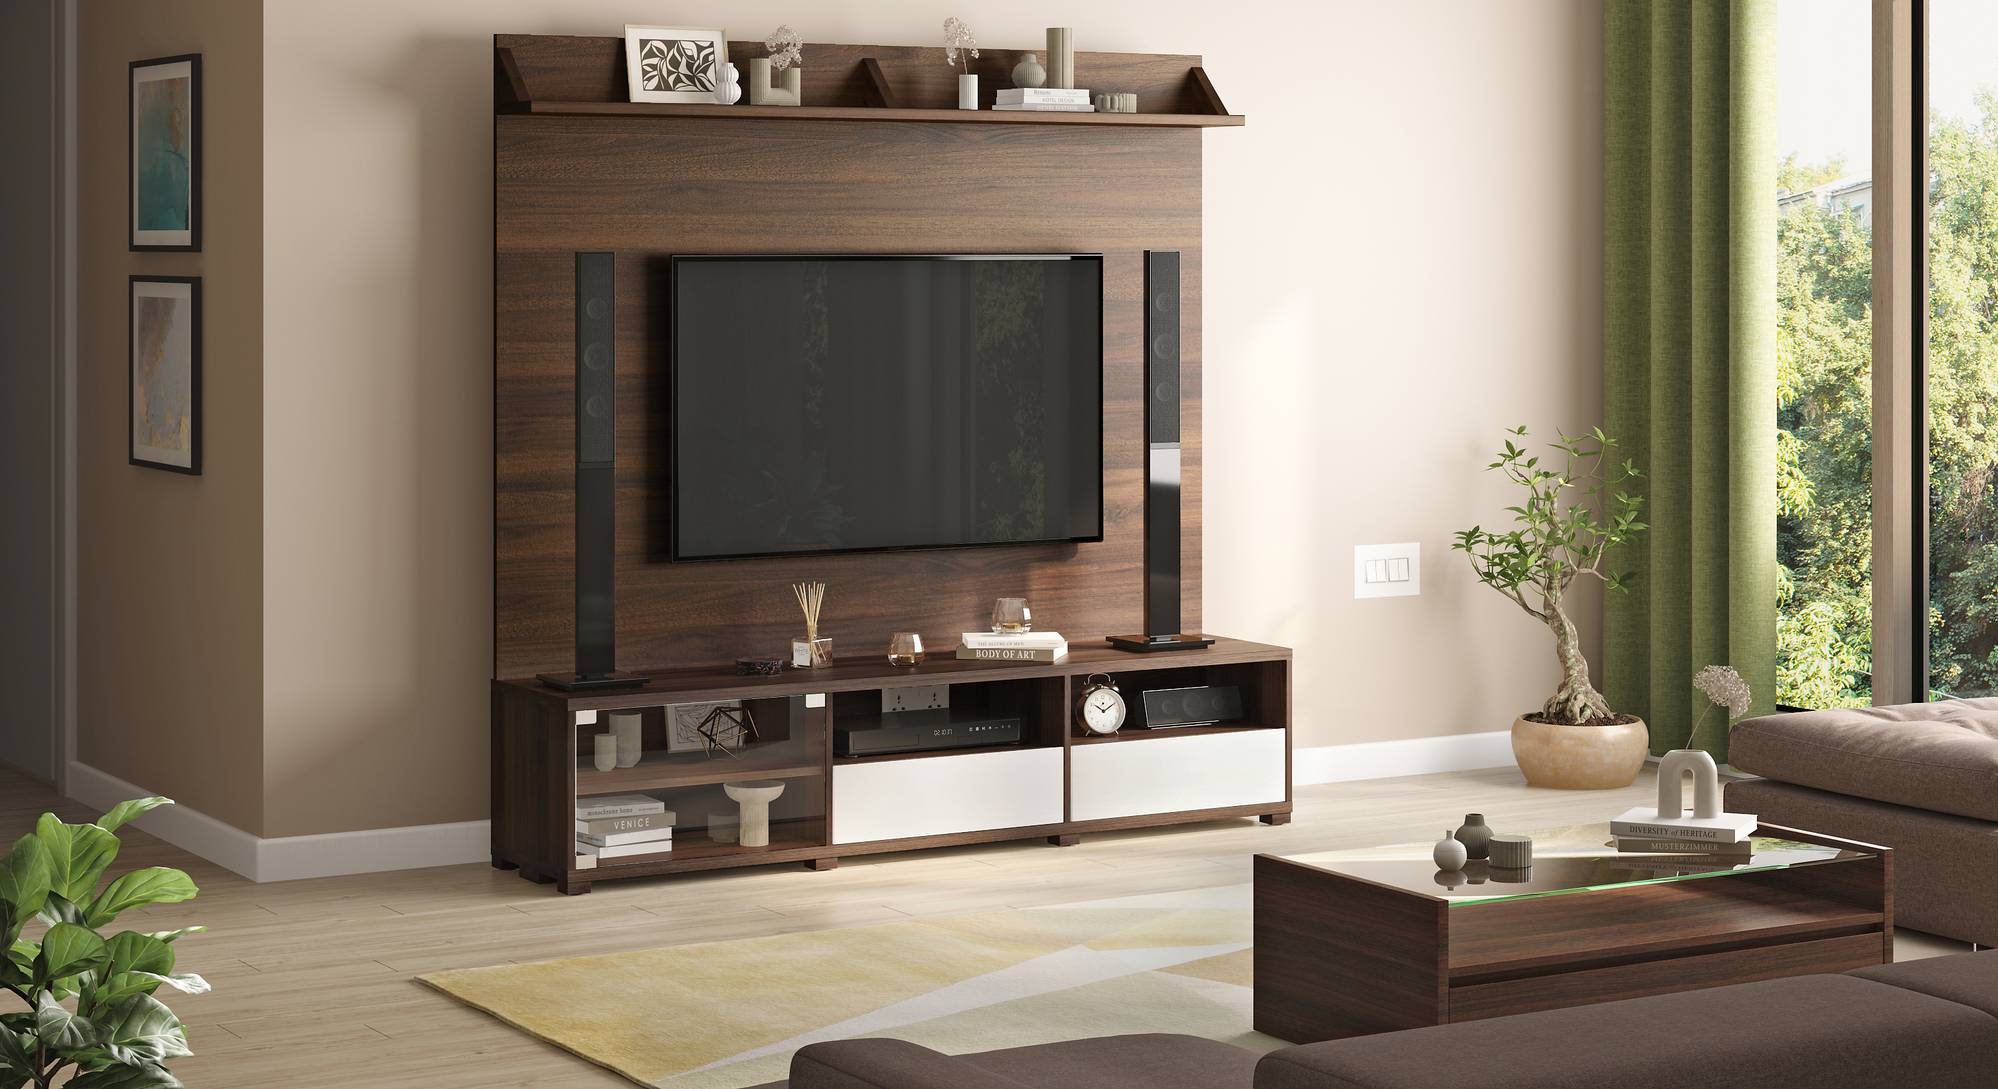 5 tv unit ideas to amp up your living room decor - urban ladder